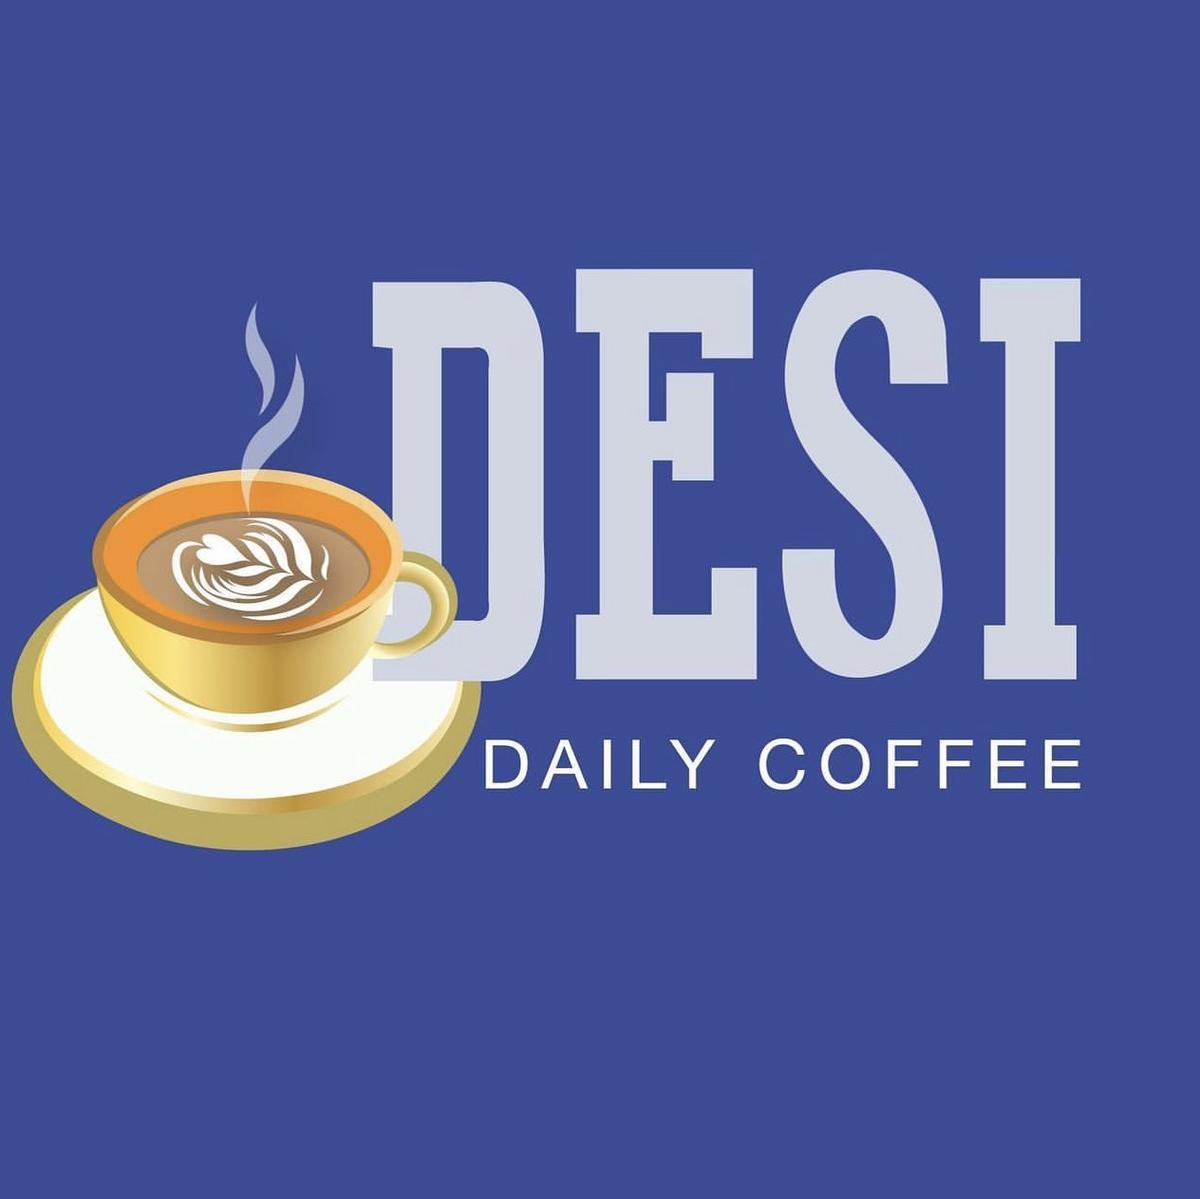 DesiDailyCoffee's images